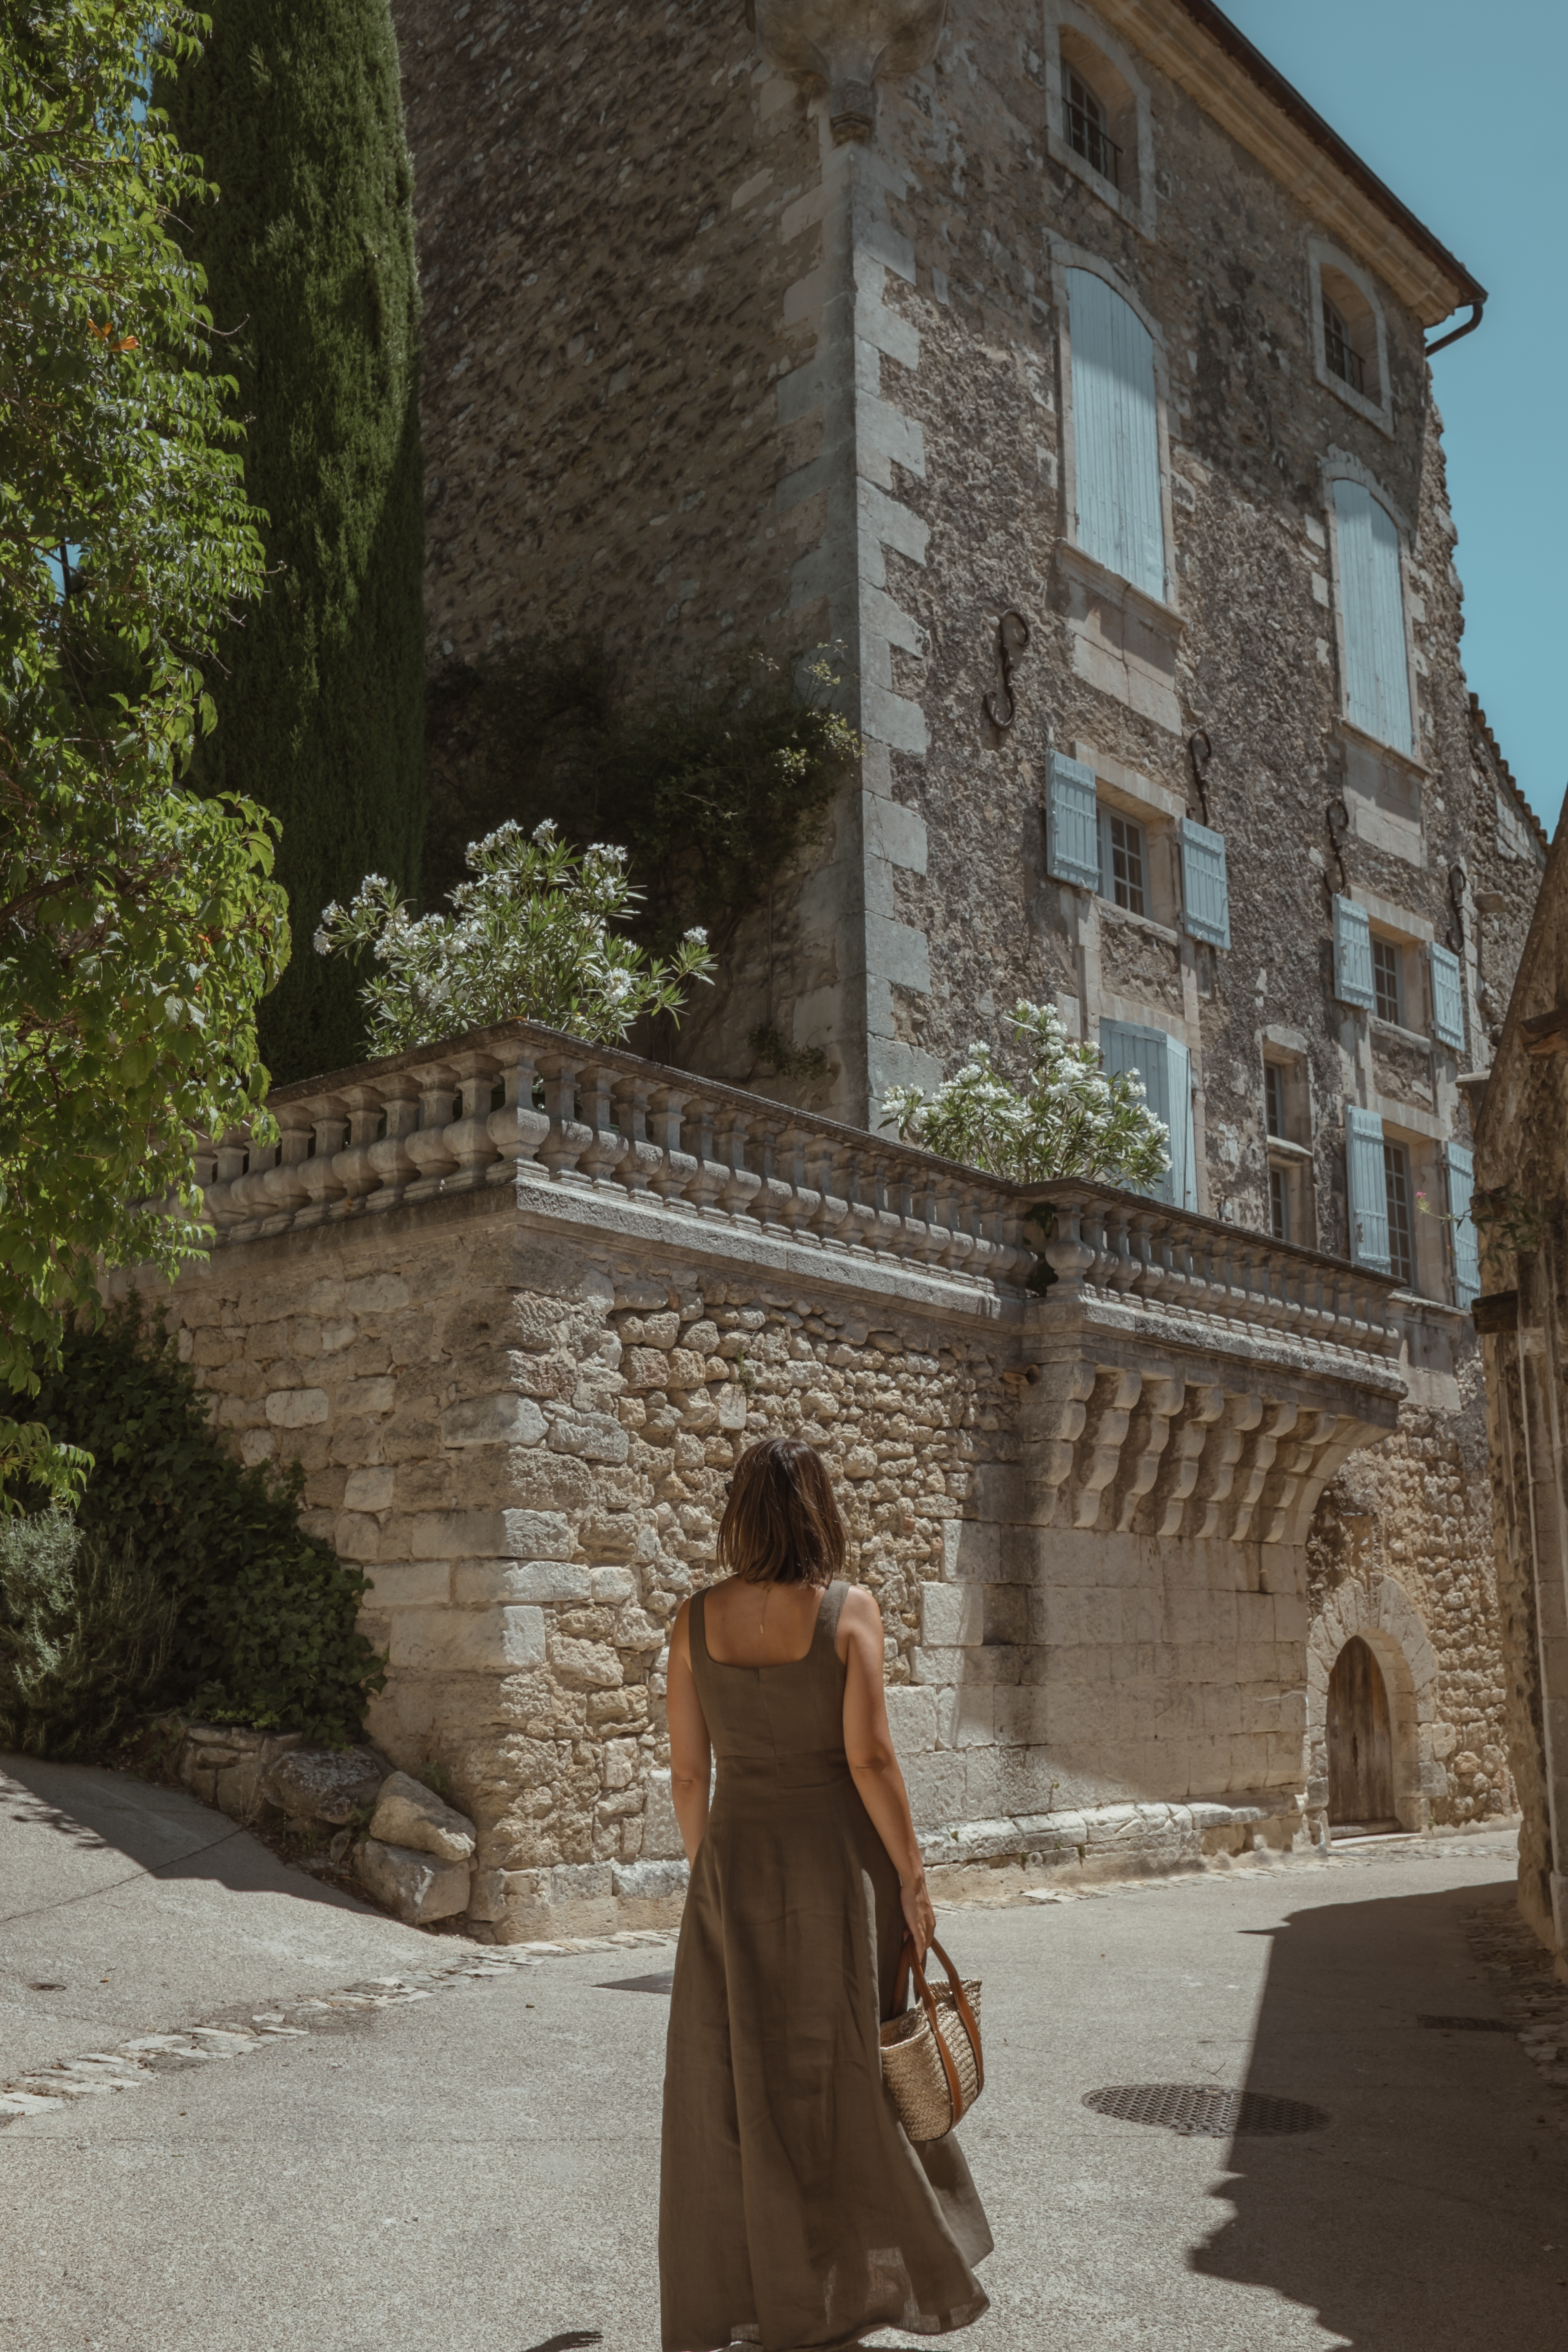 Sonia, our guide to the 10 Prettiest Towns in the South of France, in Menerbes /Photo Credit Sonia Mota